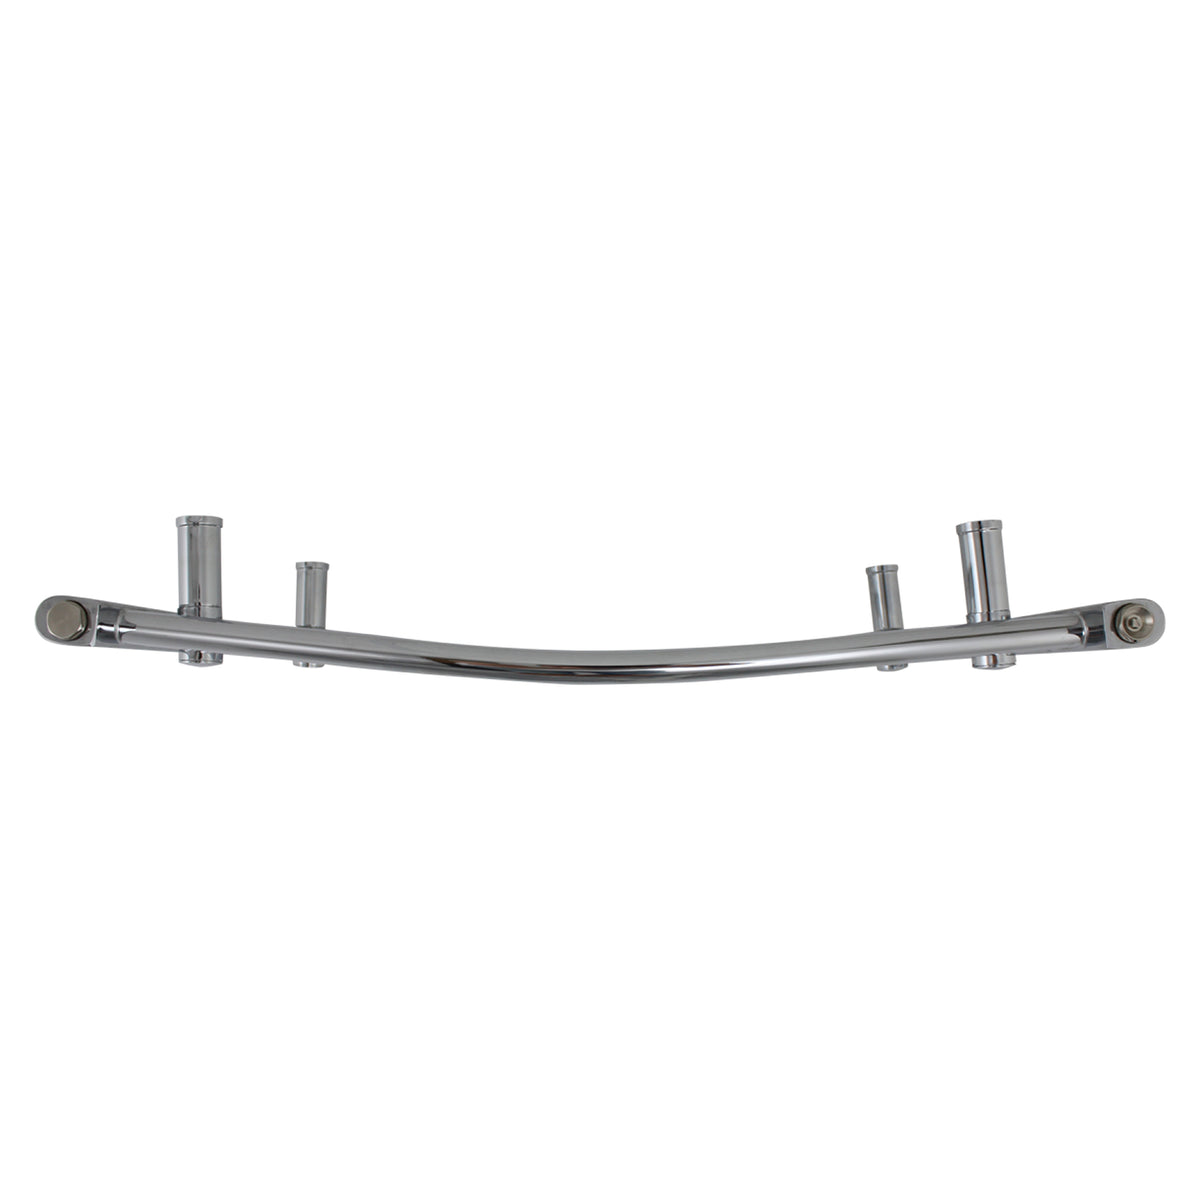 Curved Towel Rail Rad Top View Curvature Angle